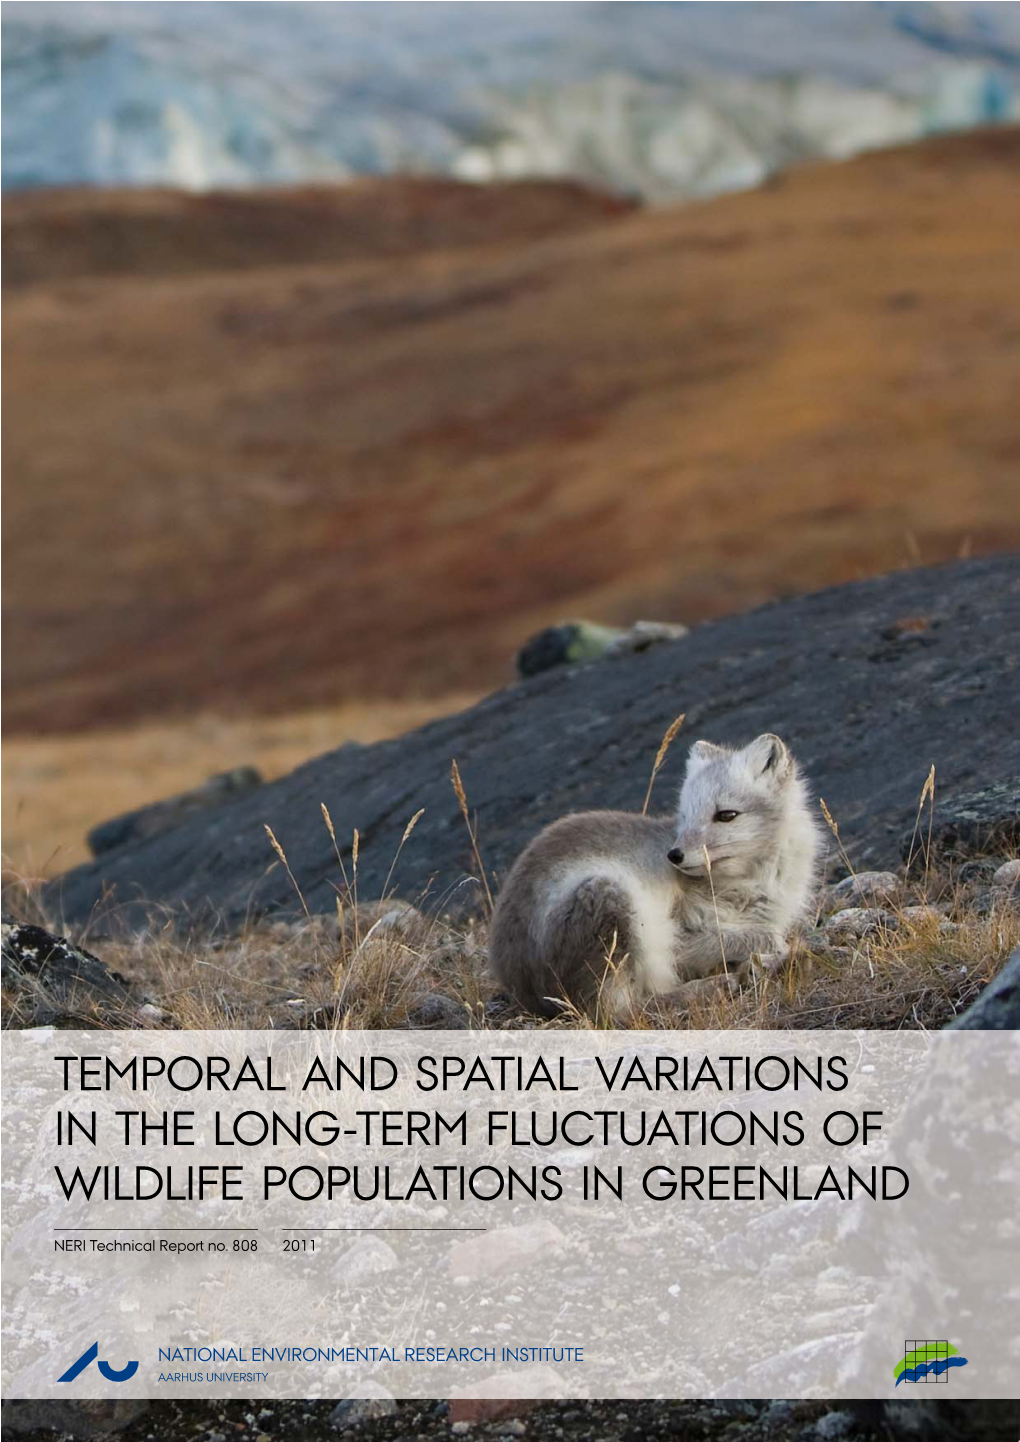 Temporal and Spatial Variations in the Long-Term Fluctuations of Wildlife Populations in Greenland